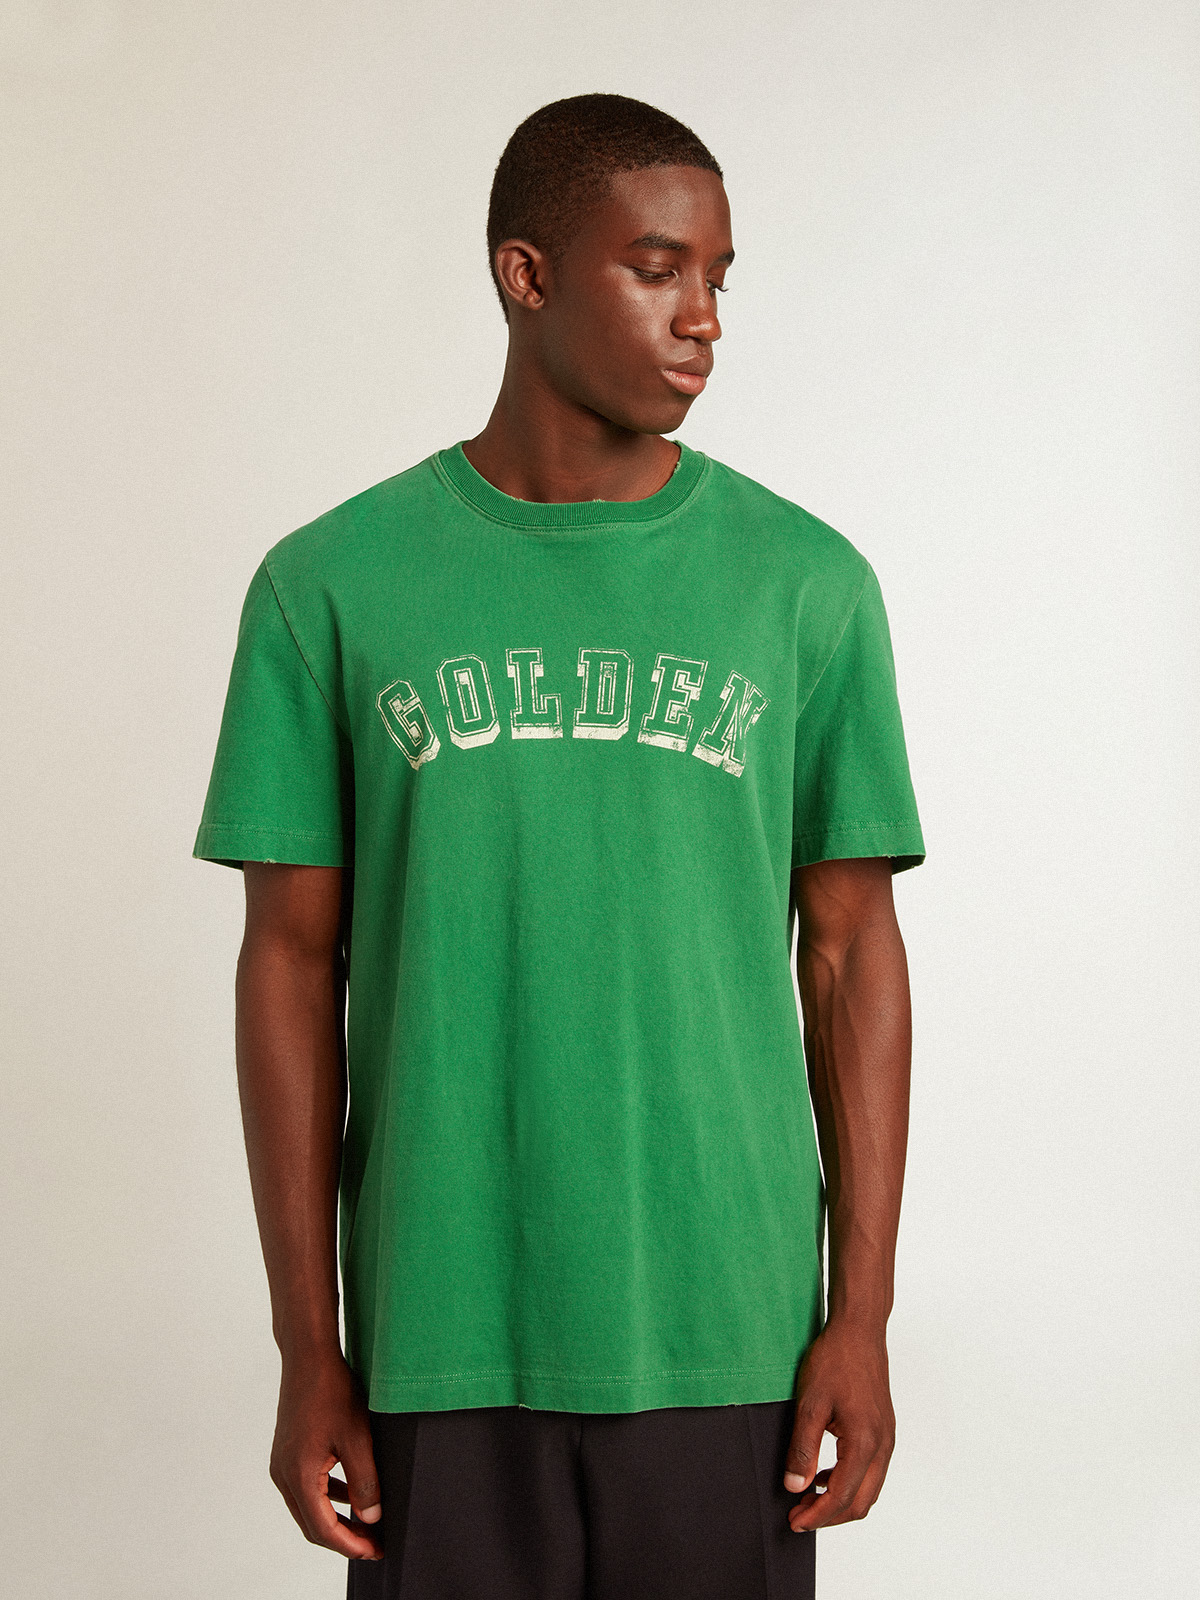 Men's green cotton T-shirt with lettering at the center | Golden Goose